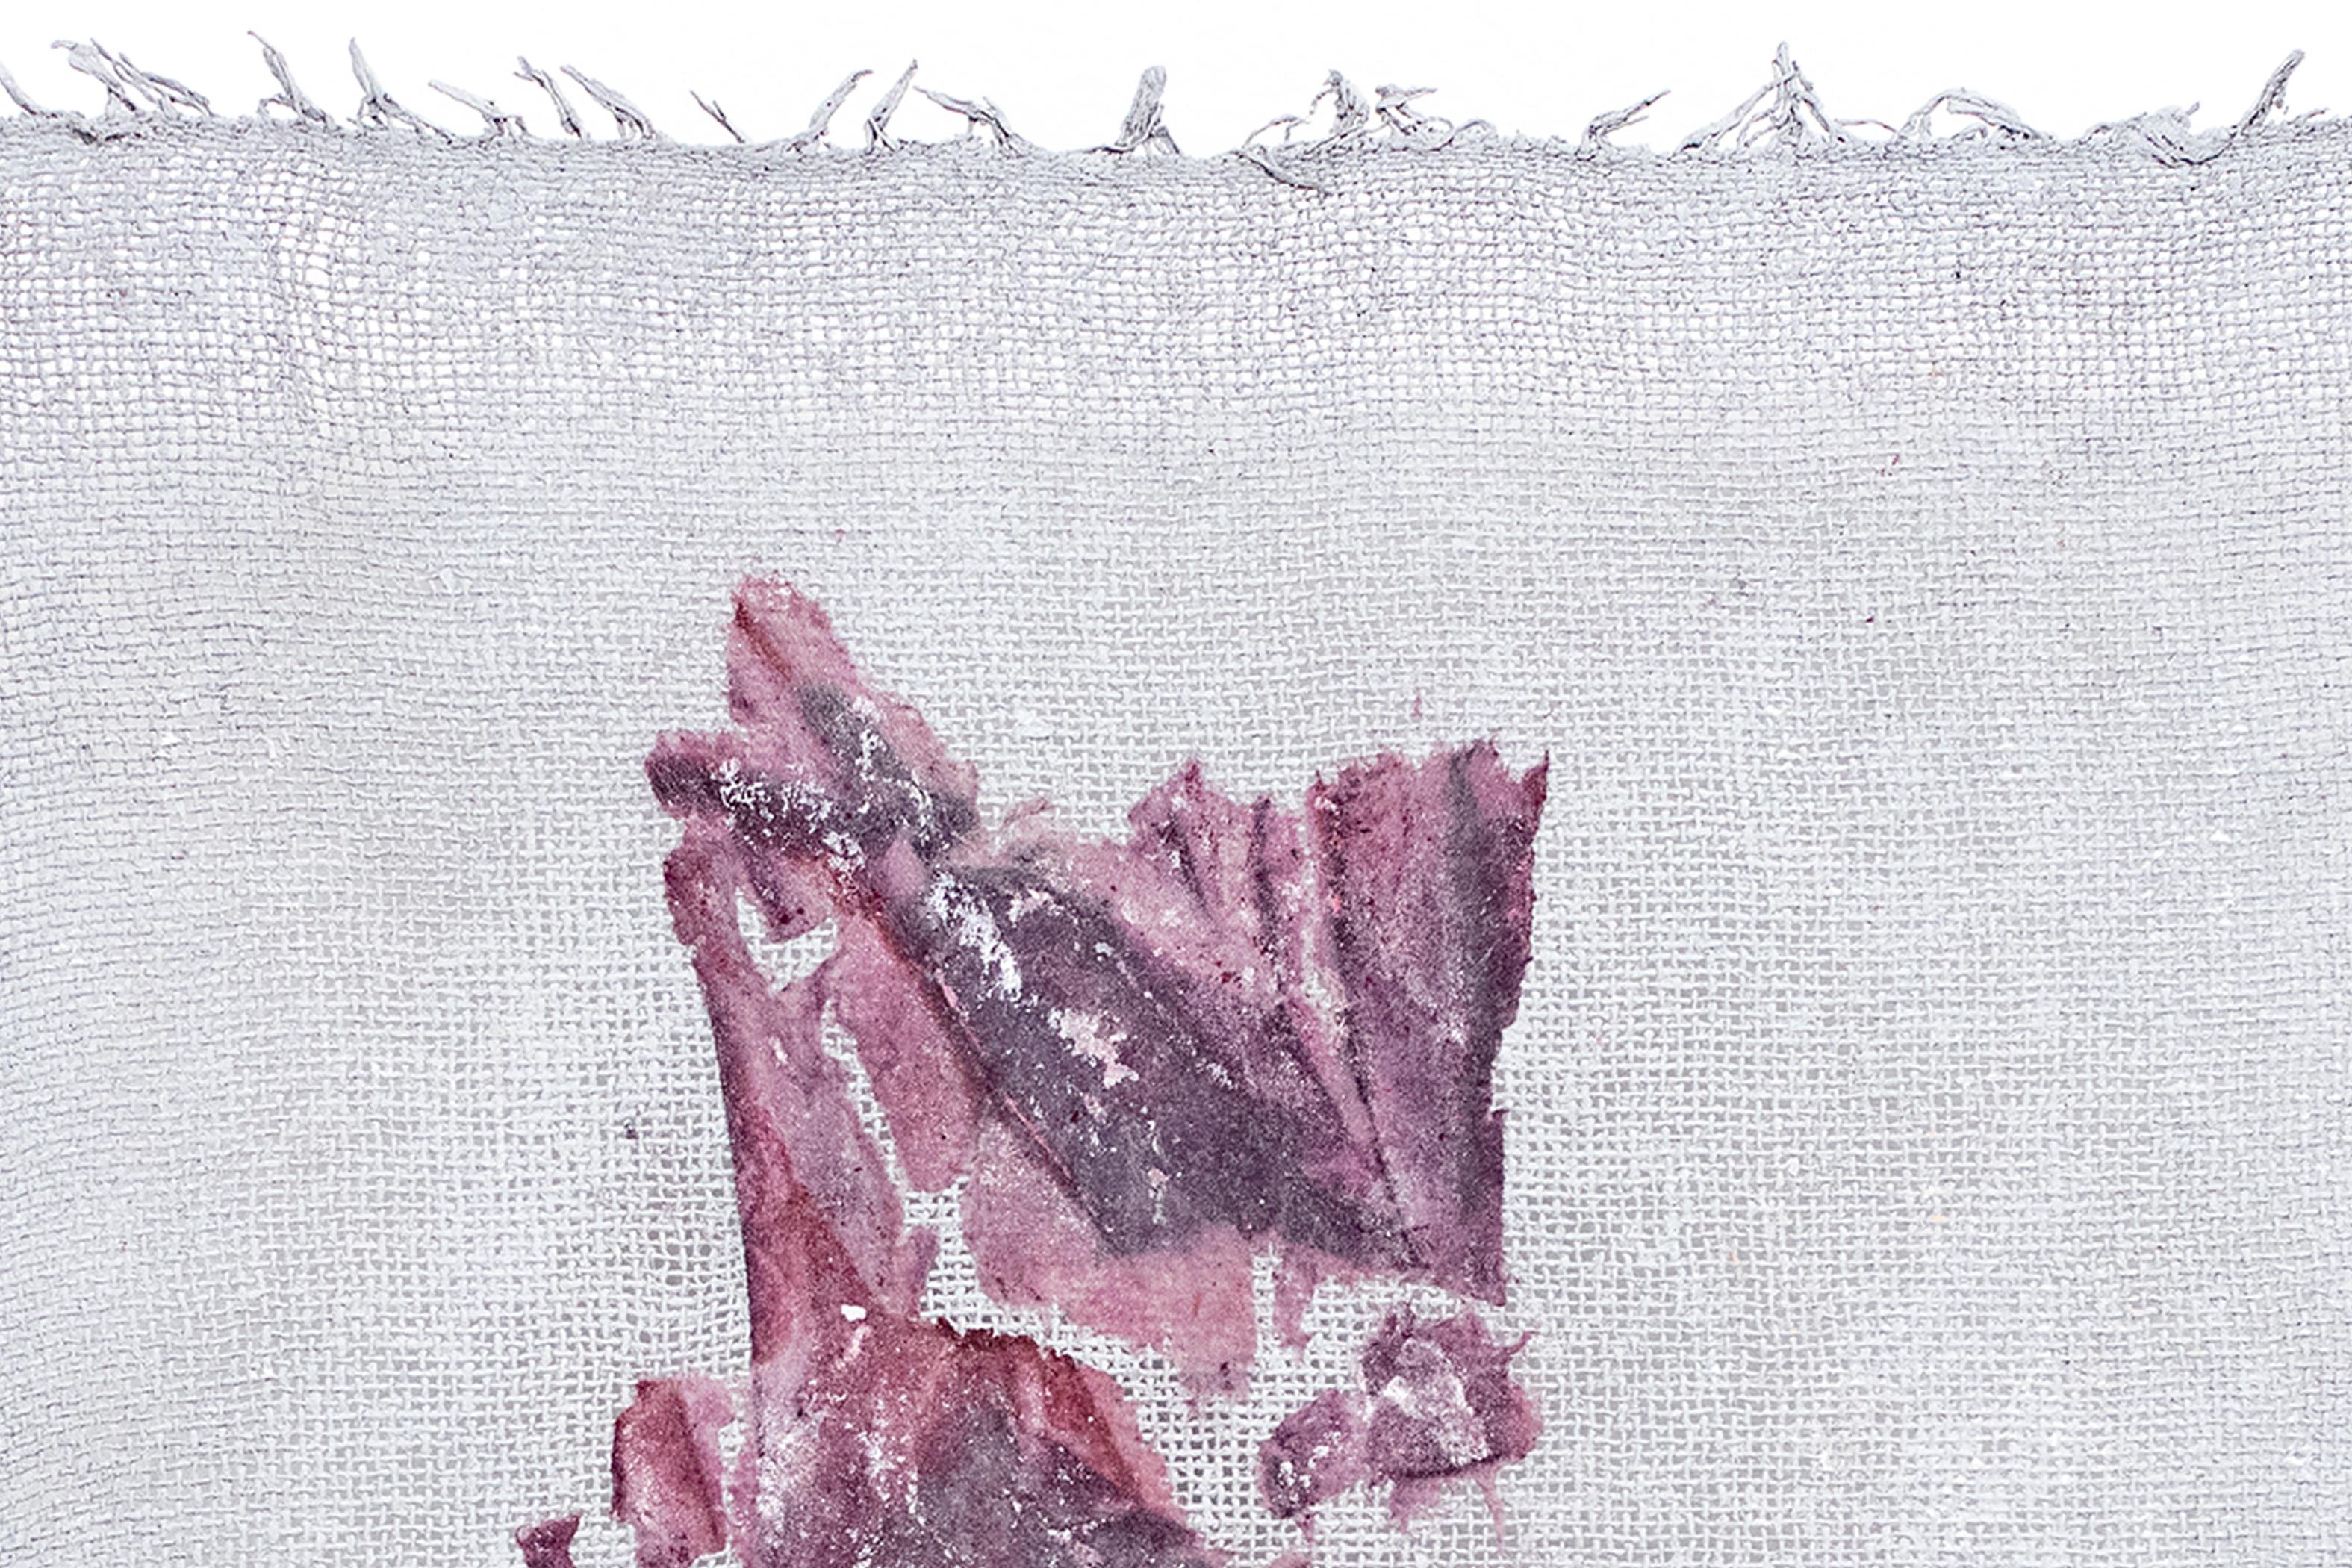 Tooth, Mulberry paper and acrylic on gauze 1